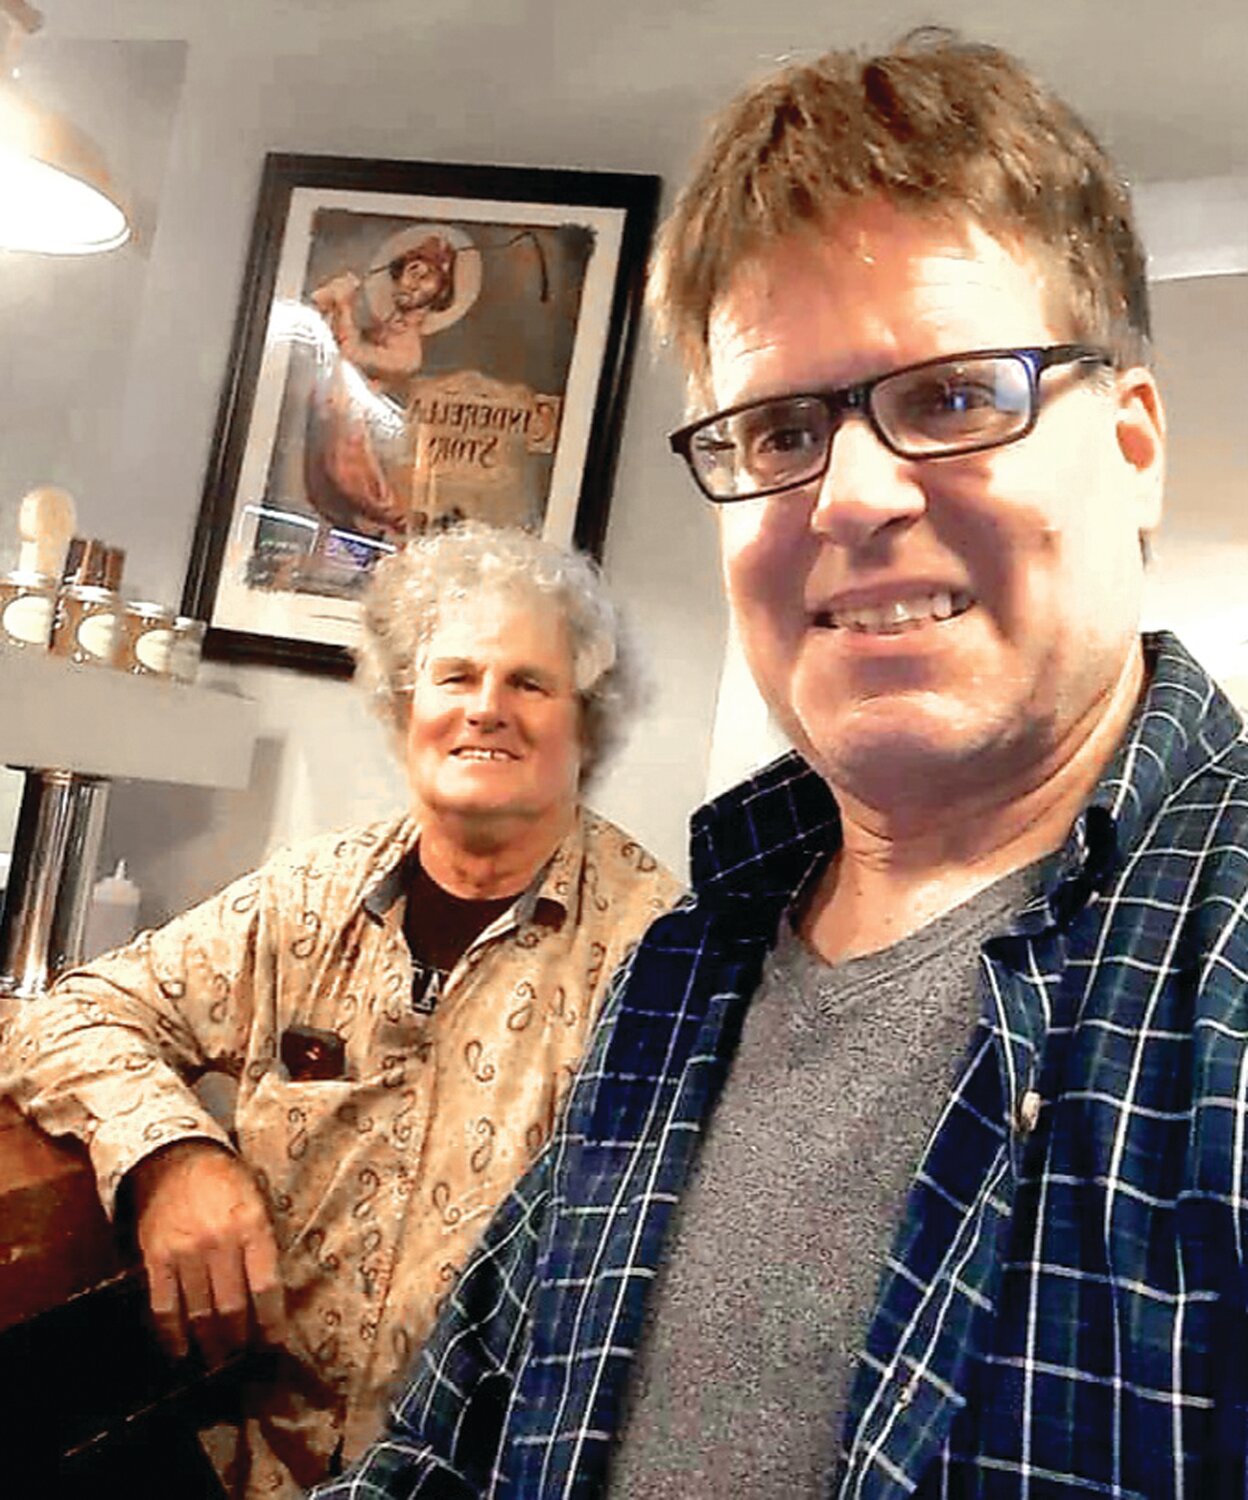 Performing pop rock classics from the ‘60s and ‘70s at St. John’s Strawberry Festival and Craft Fair will be Jim Brekus of Allentown, left, on acoustic guitar and vocals, and Jim Loftus of Catasauqua, on keyboard and vocals.